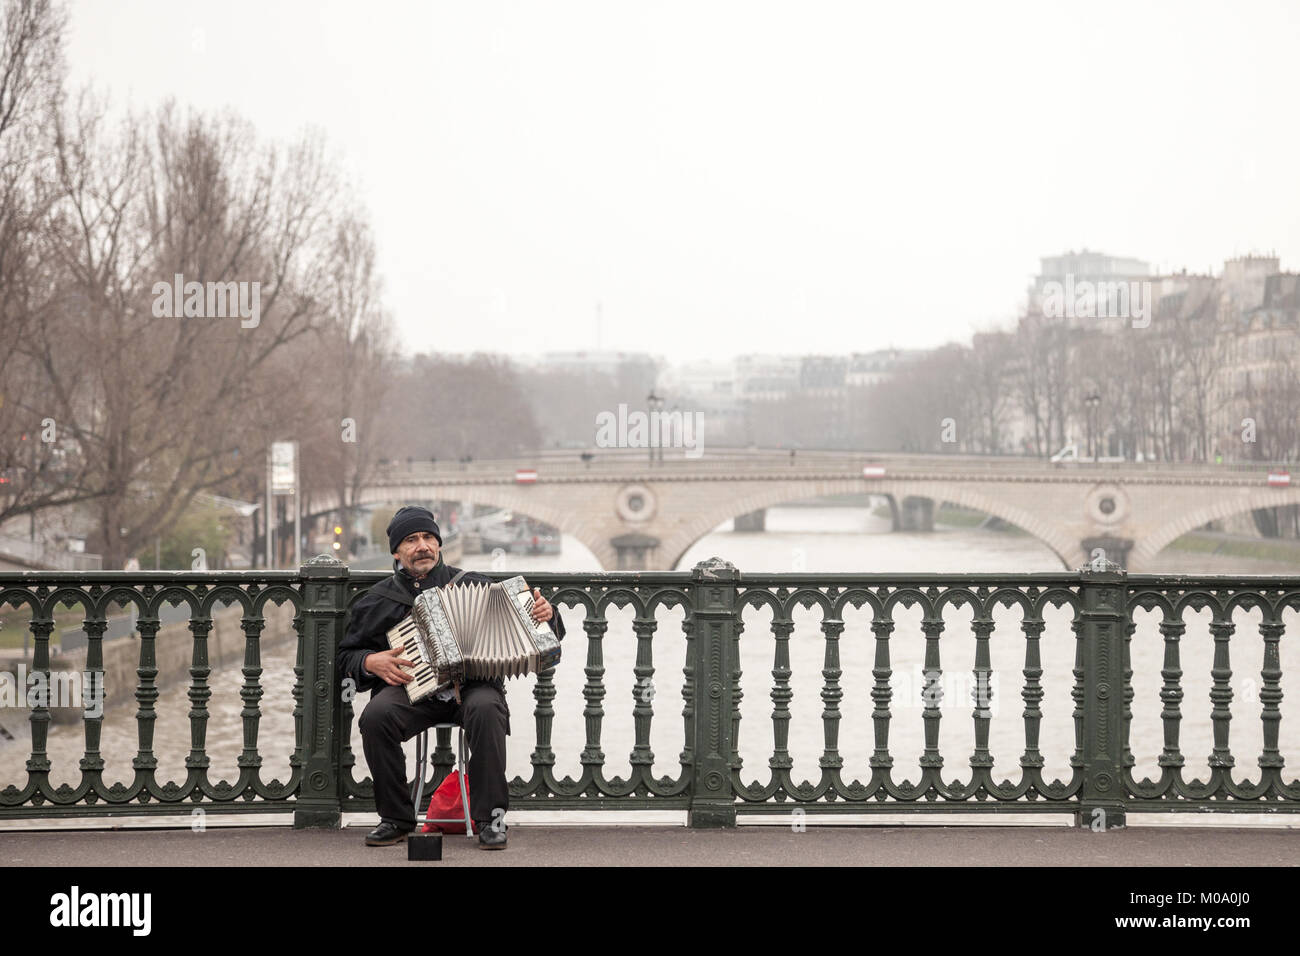 PARIS, FRANCE - DECEMBER 20, 2017:  Accordionist plating accordion on the Arcole bridge in Paris, over the Seine river. Accordion music is supposed to Stock Photo